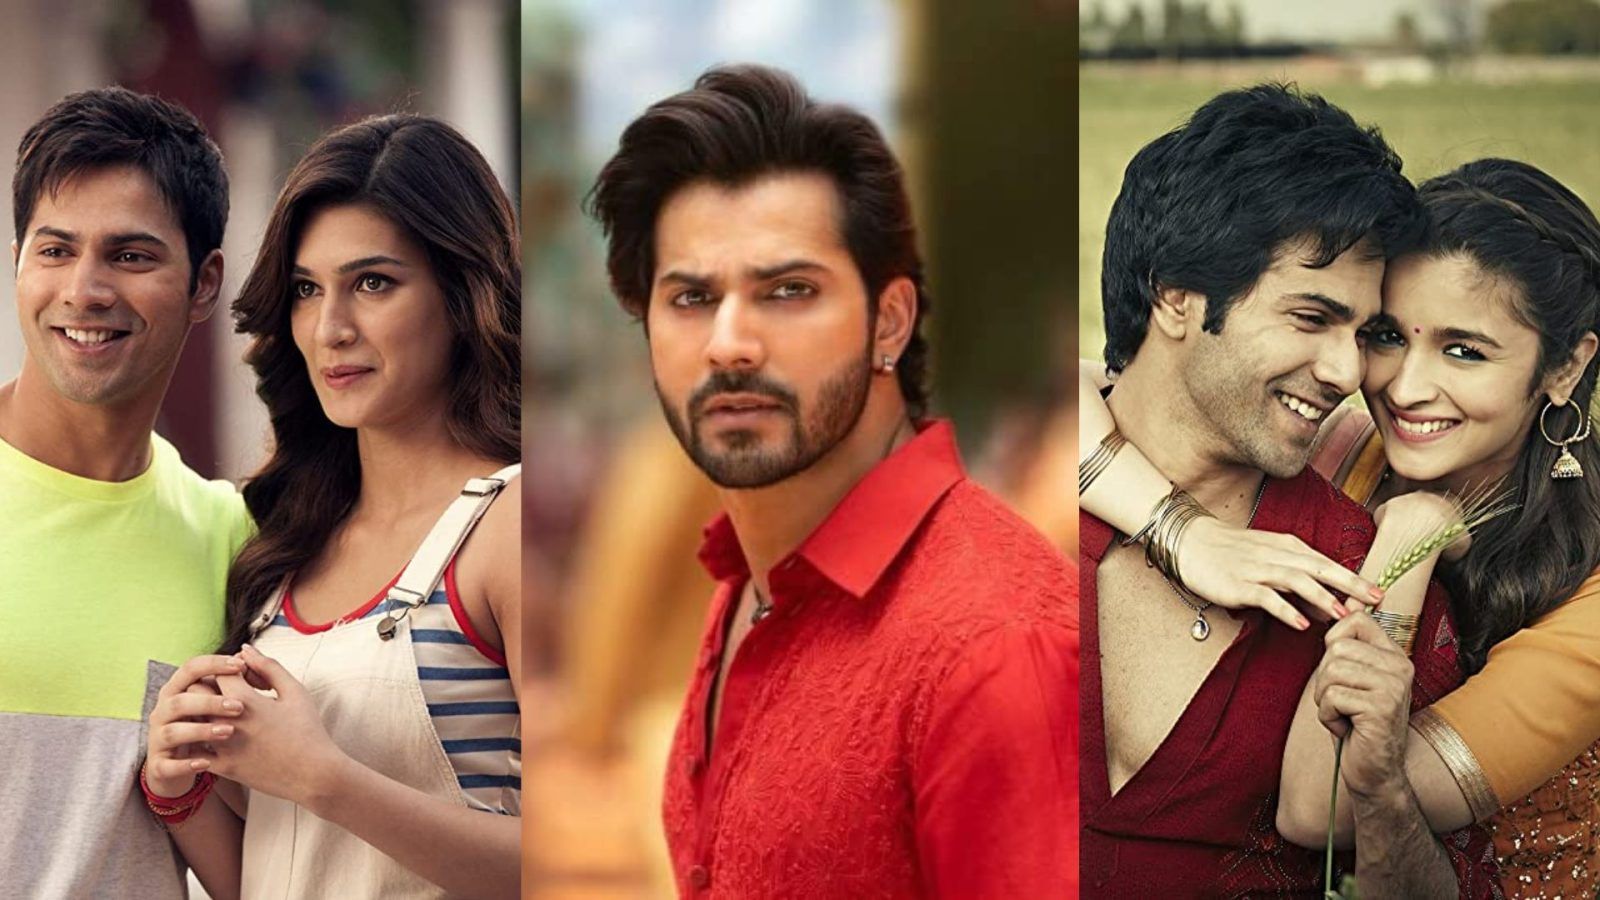 The best Varun Dhawan movies to watch right now